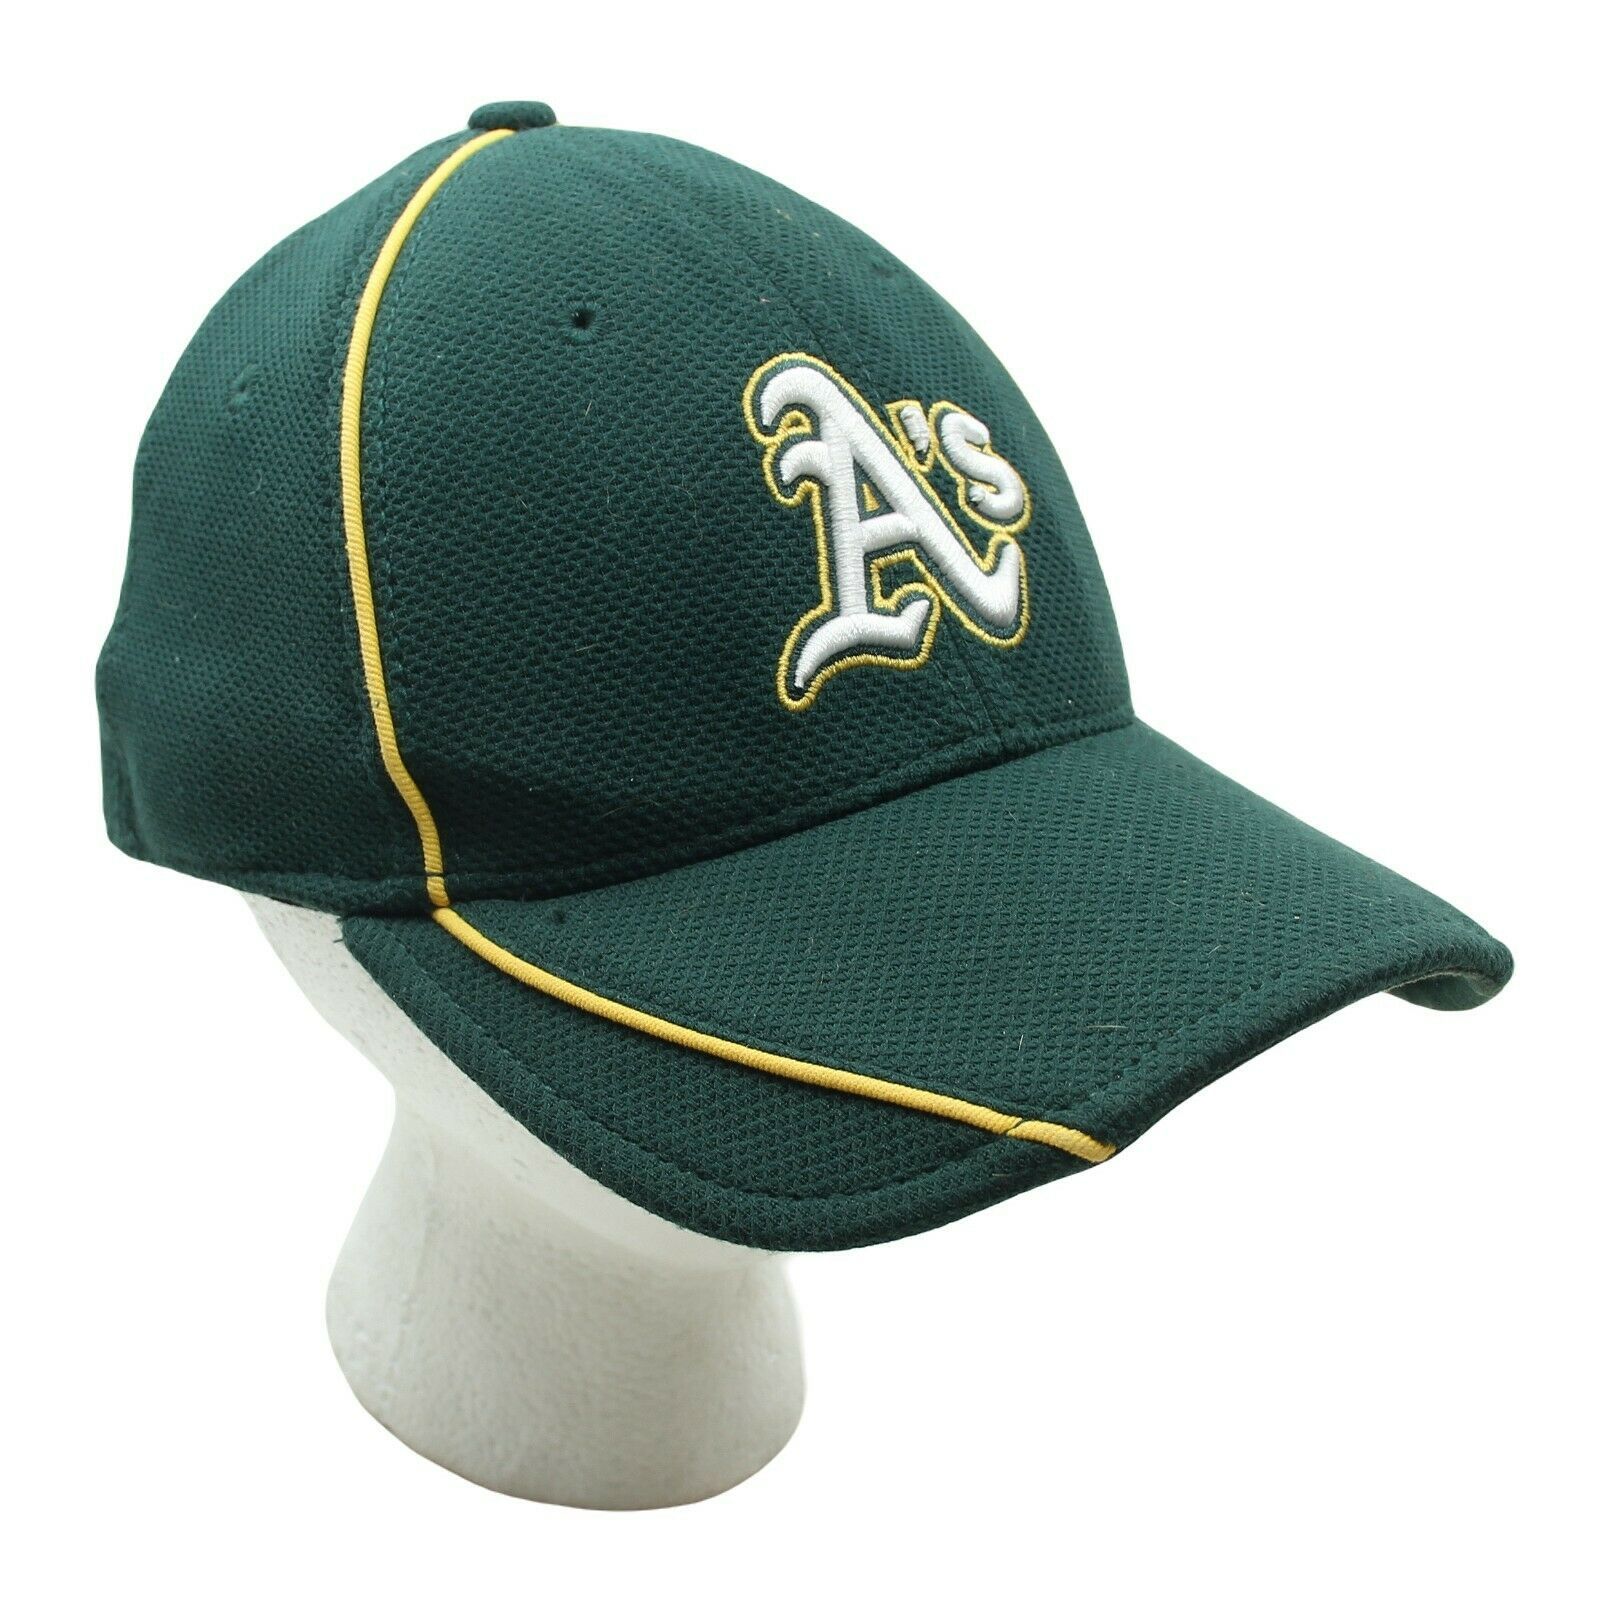 Primary image for NEW ERA Oakland A's Athletics Green MLB Authentic Embroidered Youth Fitted Hat